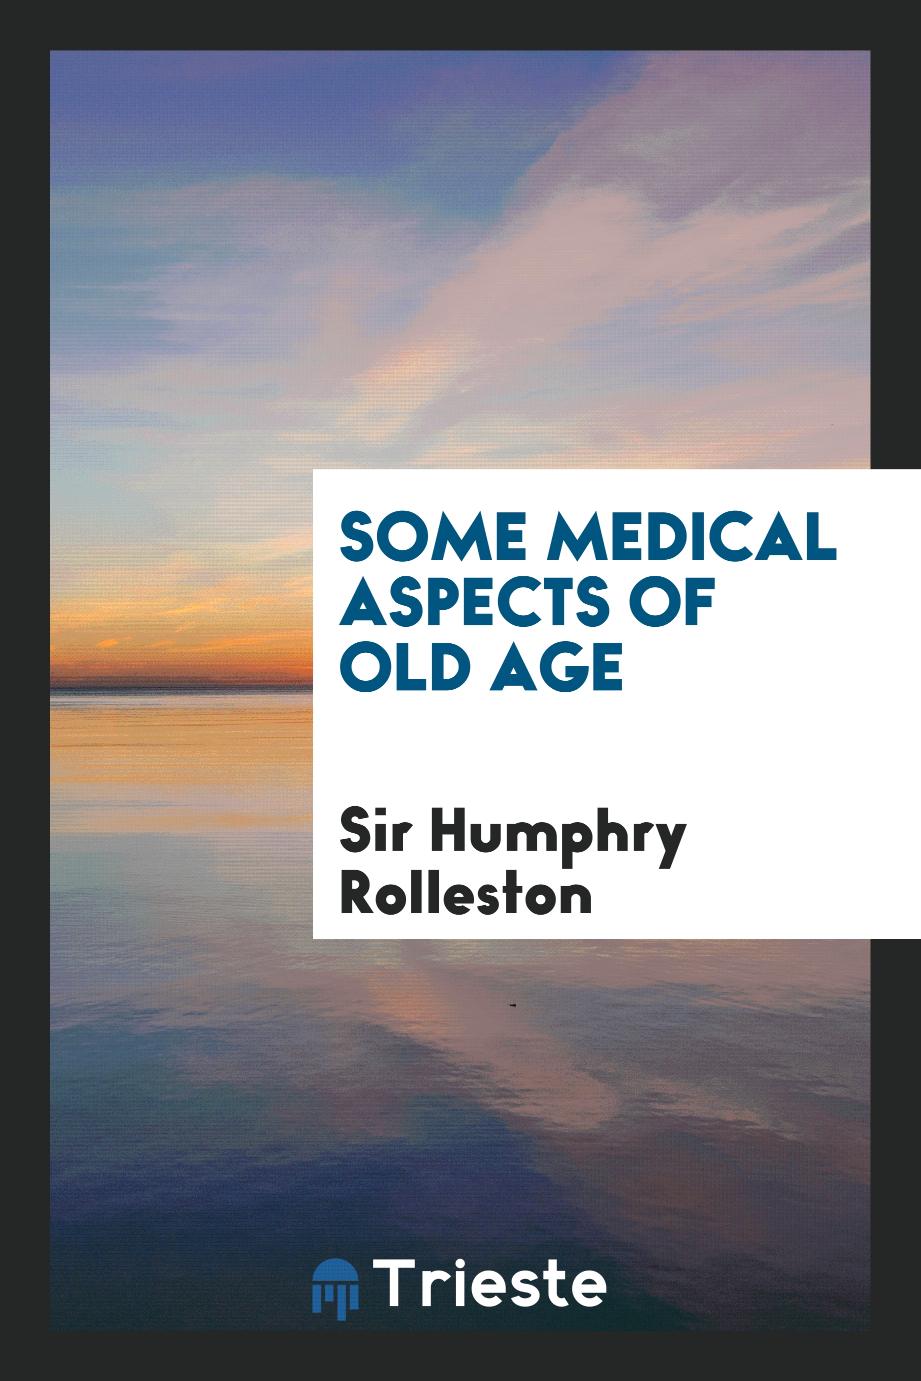 Some medical aspects of old age